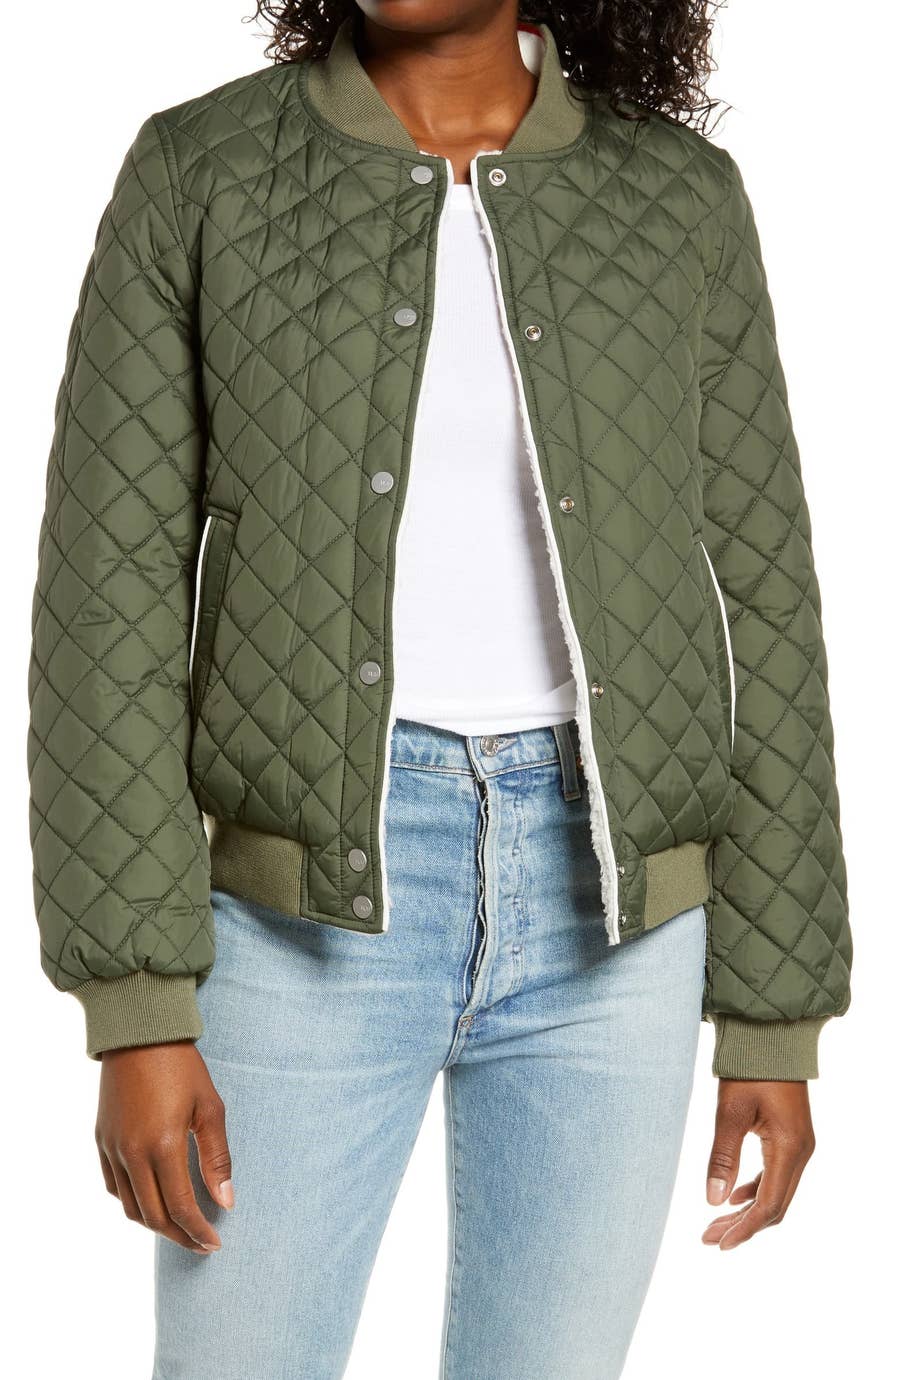 NEW WOMENS XXS S L XL J CREW BOMBER JACKET WITH SIDE ZIPS & QUILTED LINING 